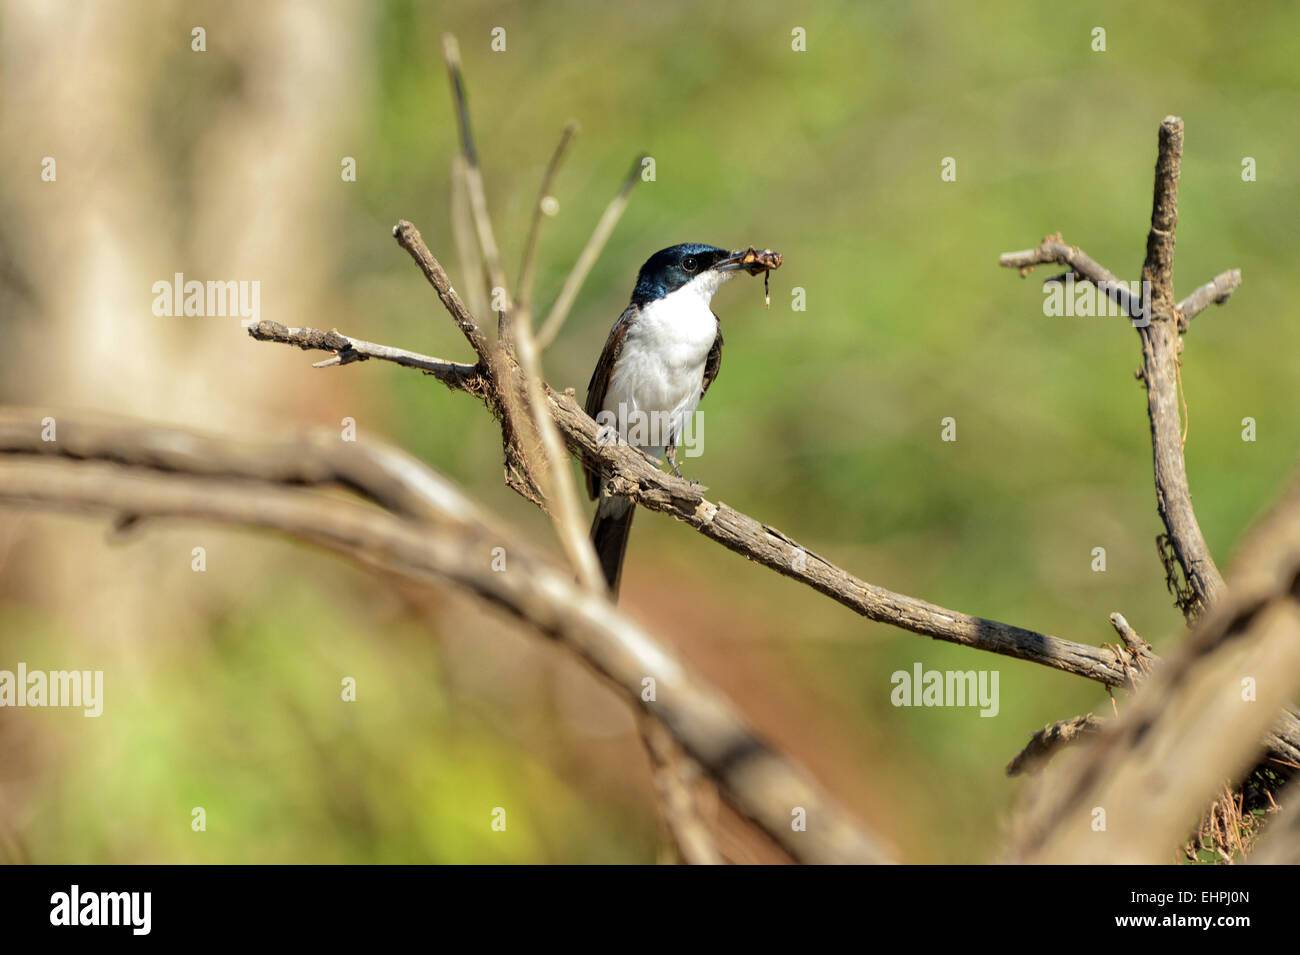 Restless flycatcher eats a insect for lunch Stock Photo